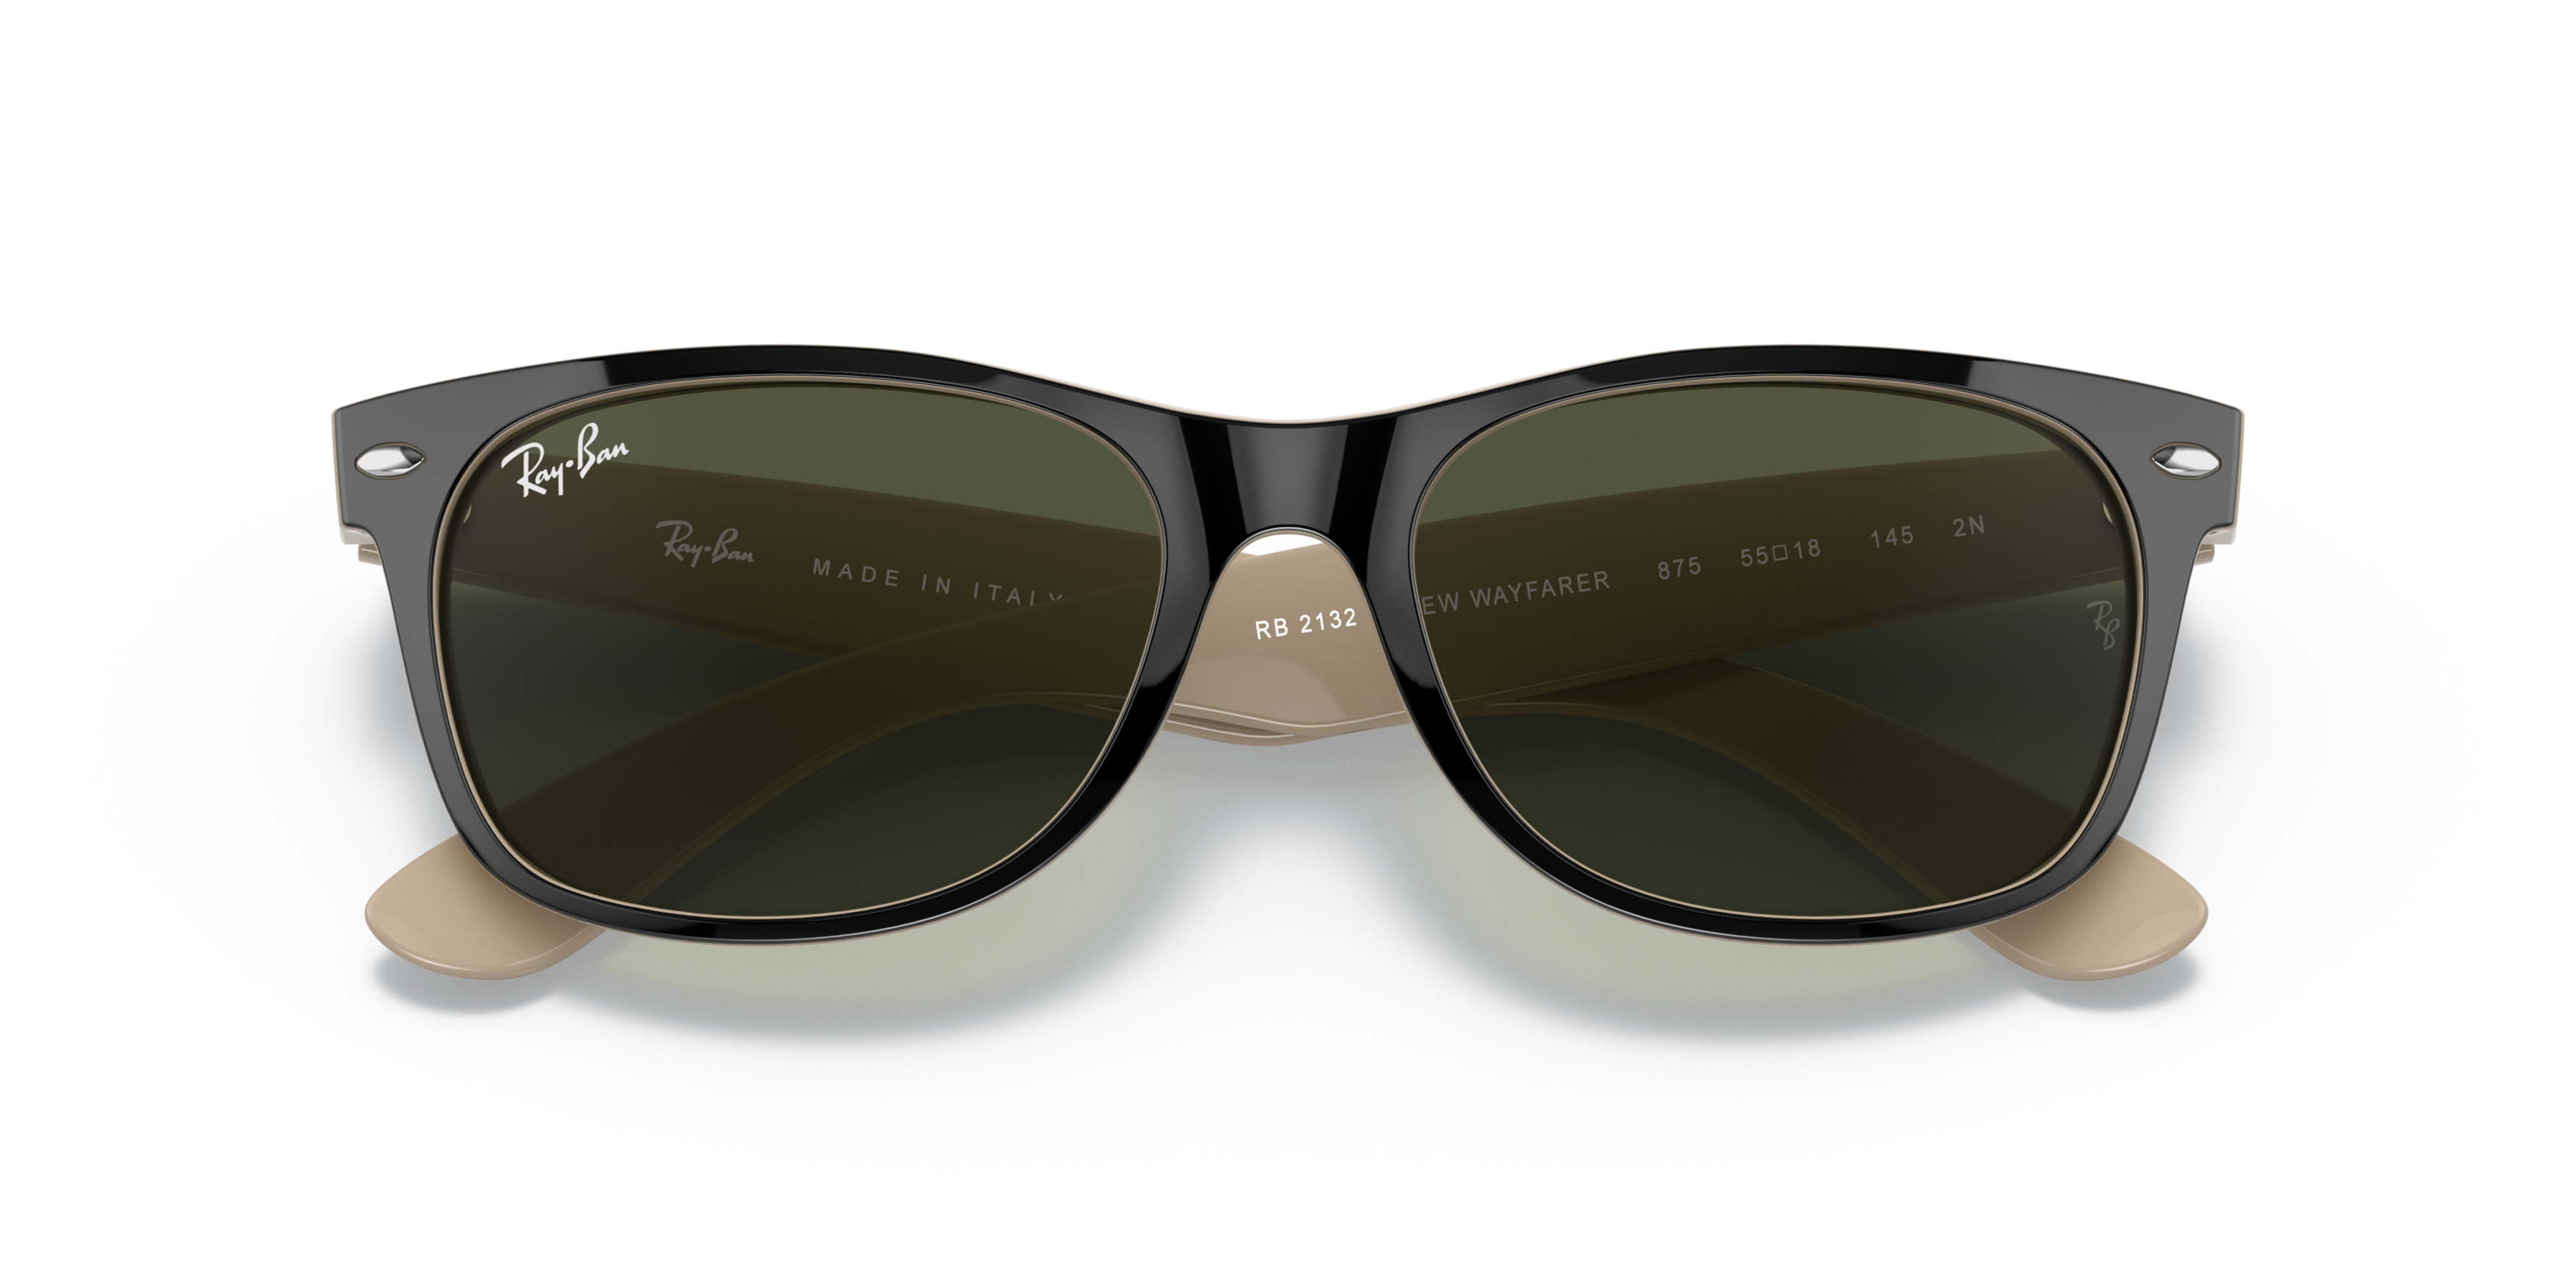 [products.image.folded] Ray-Ban New Wayfarer RB2132 875